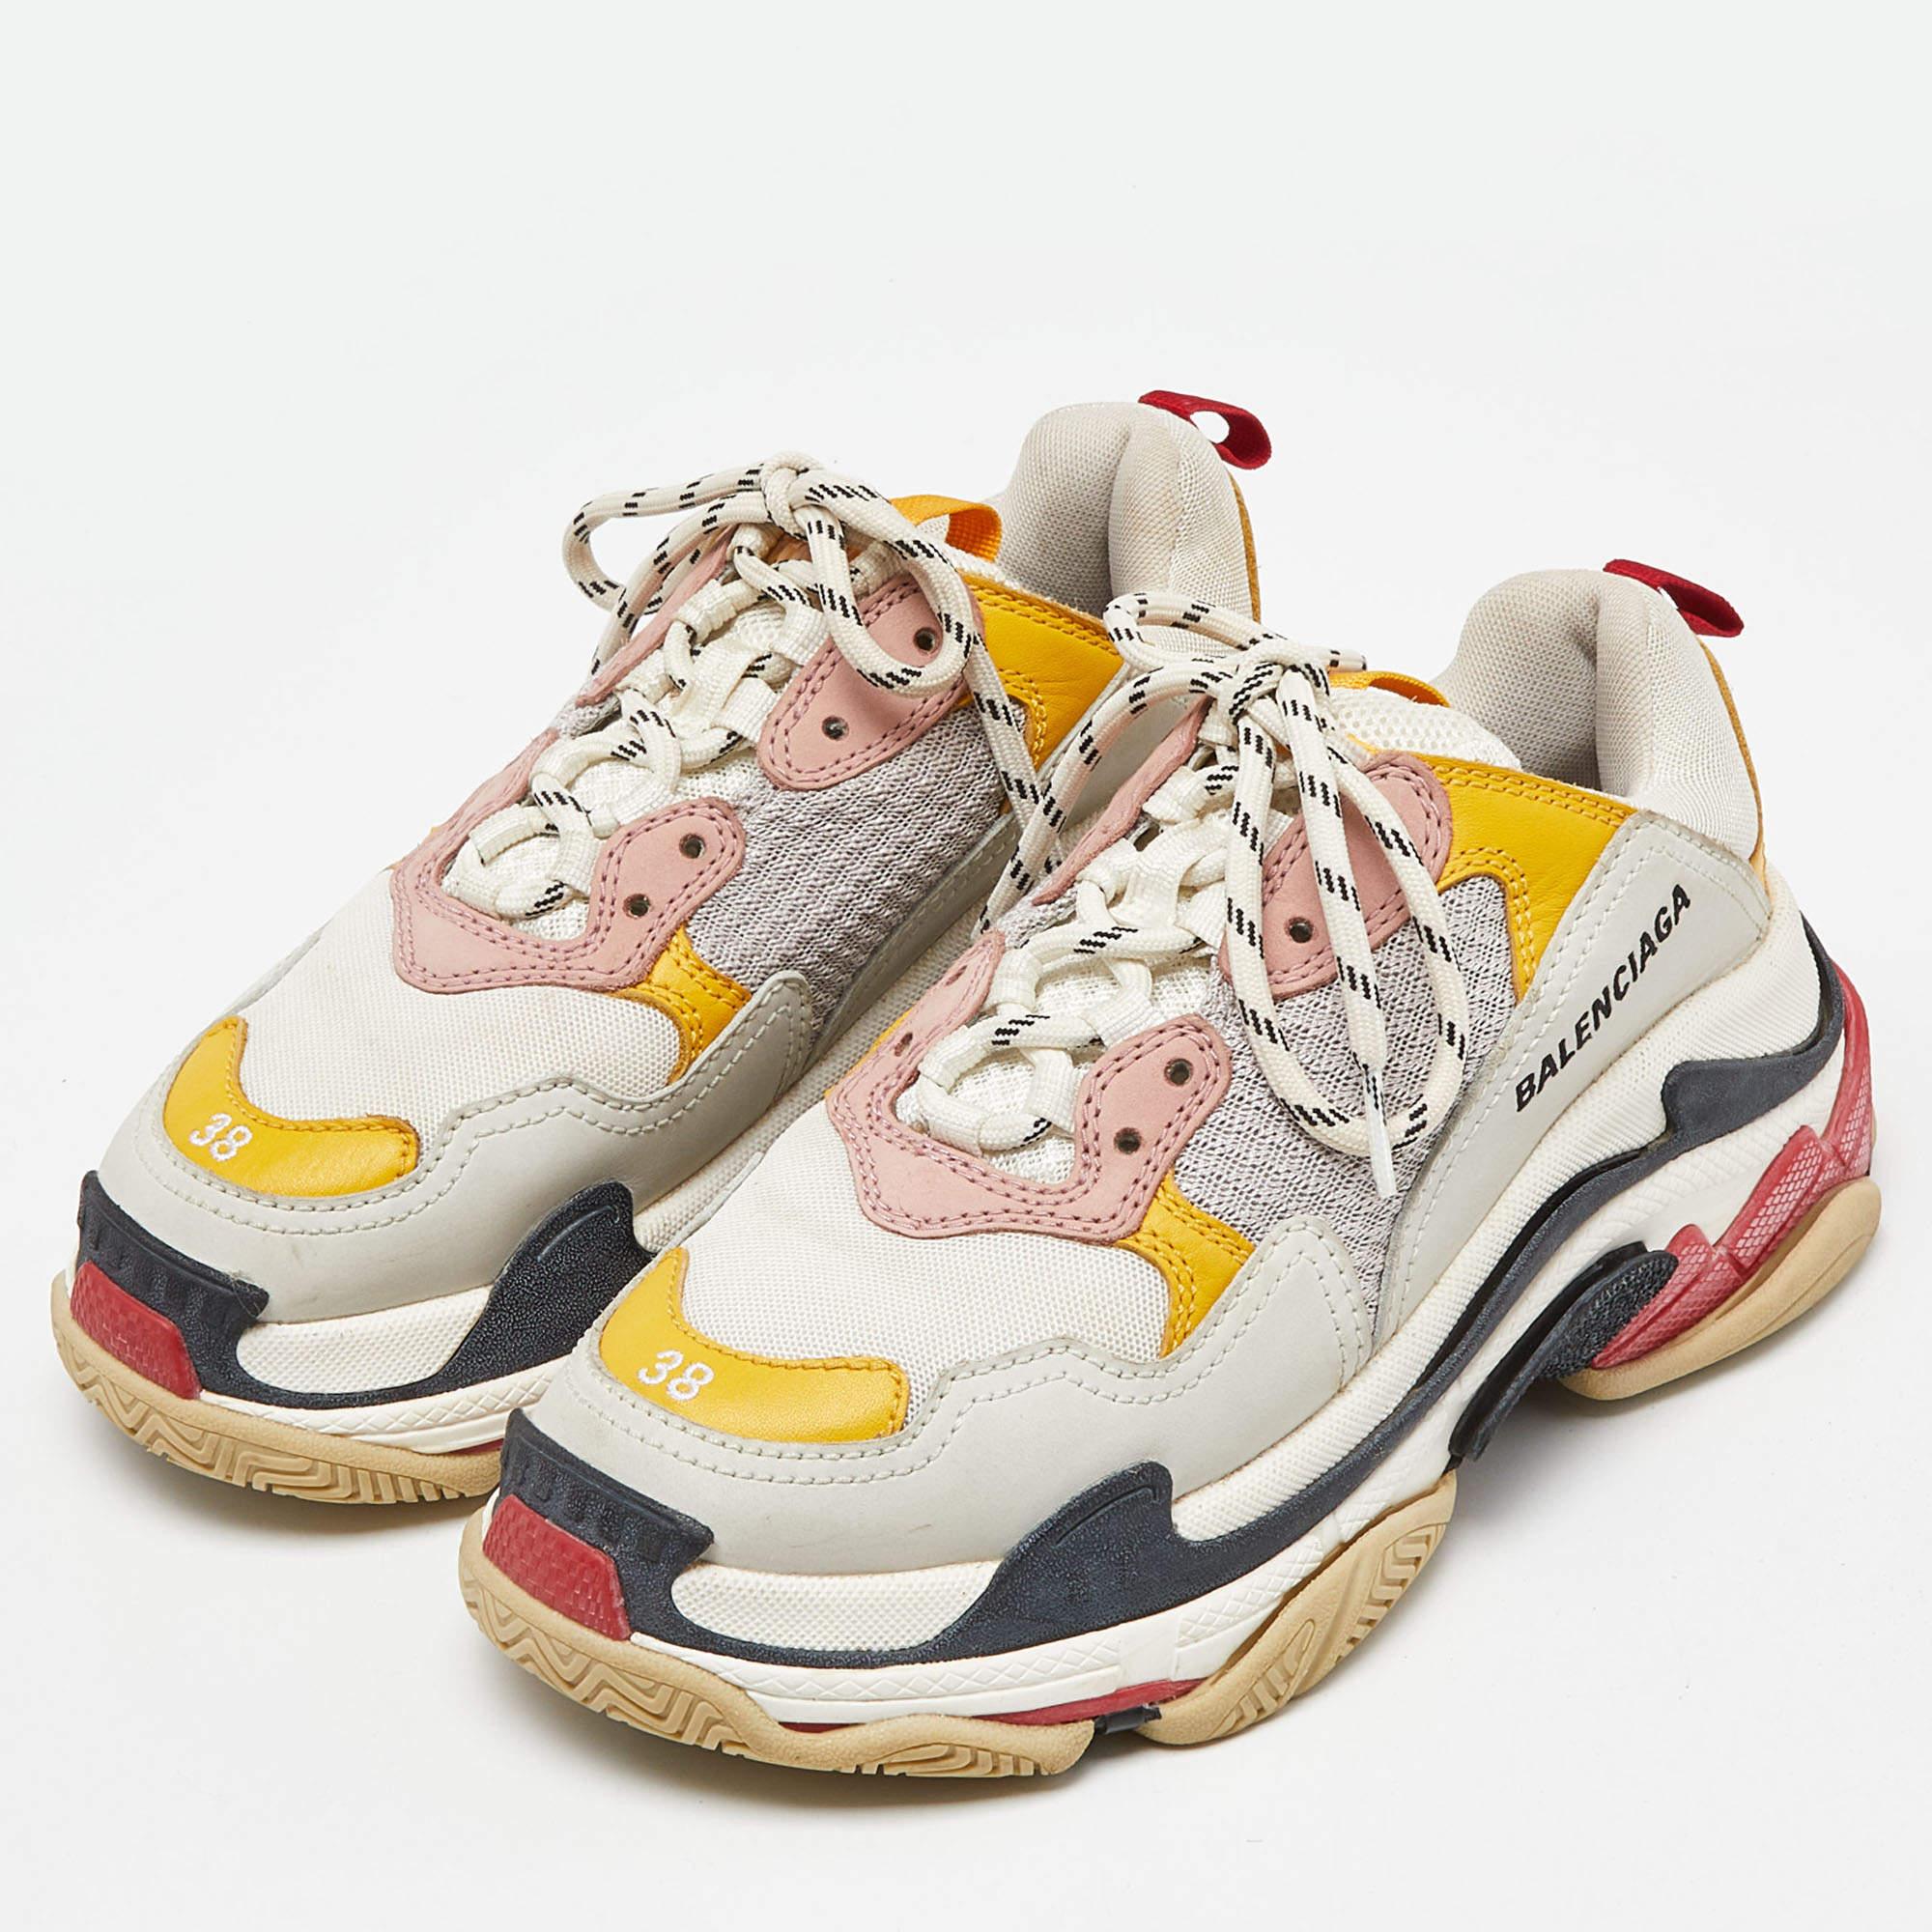 Balenciaga Multicolor Faux Leather and Mesh Triple S Sneakers Size 38 For Sale 4